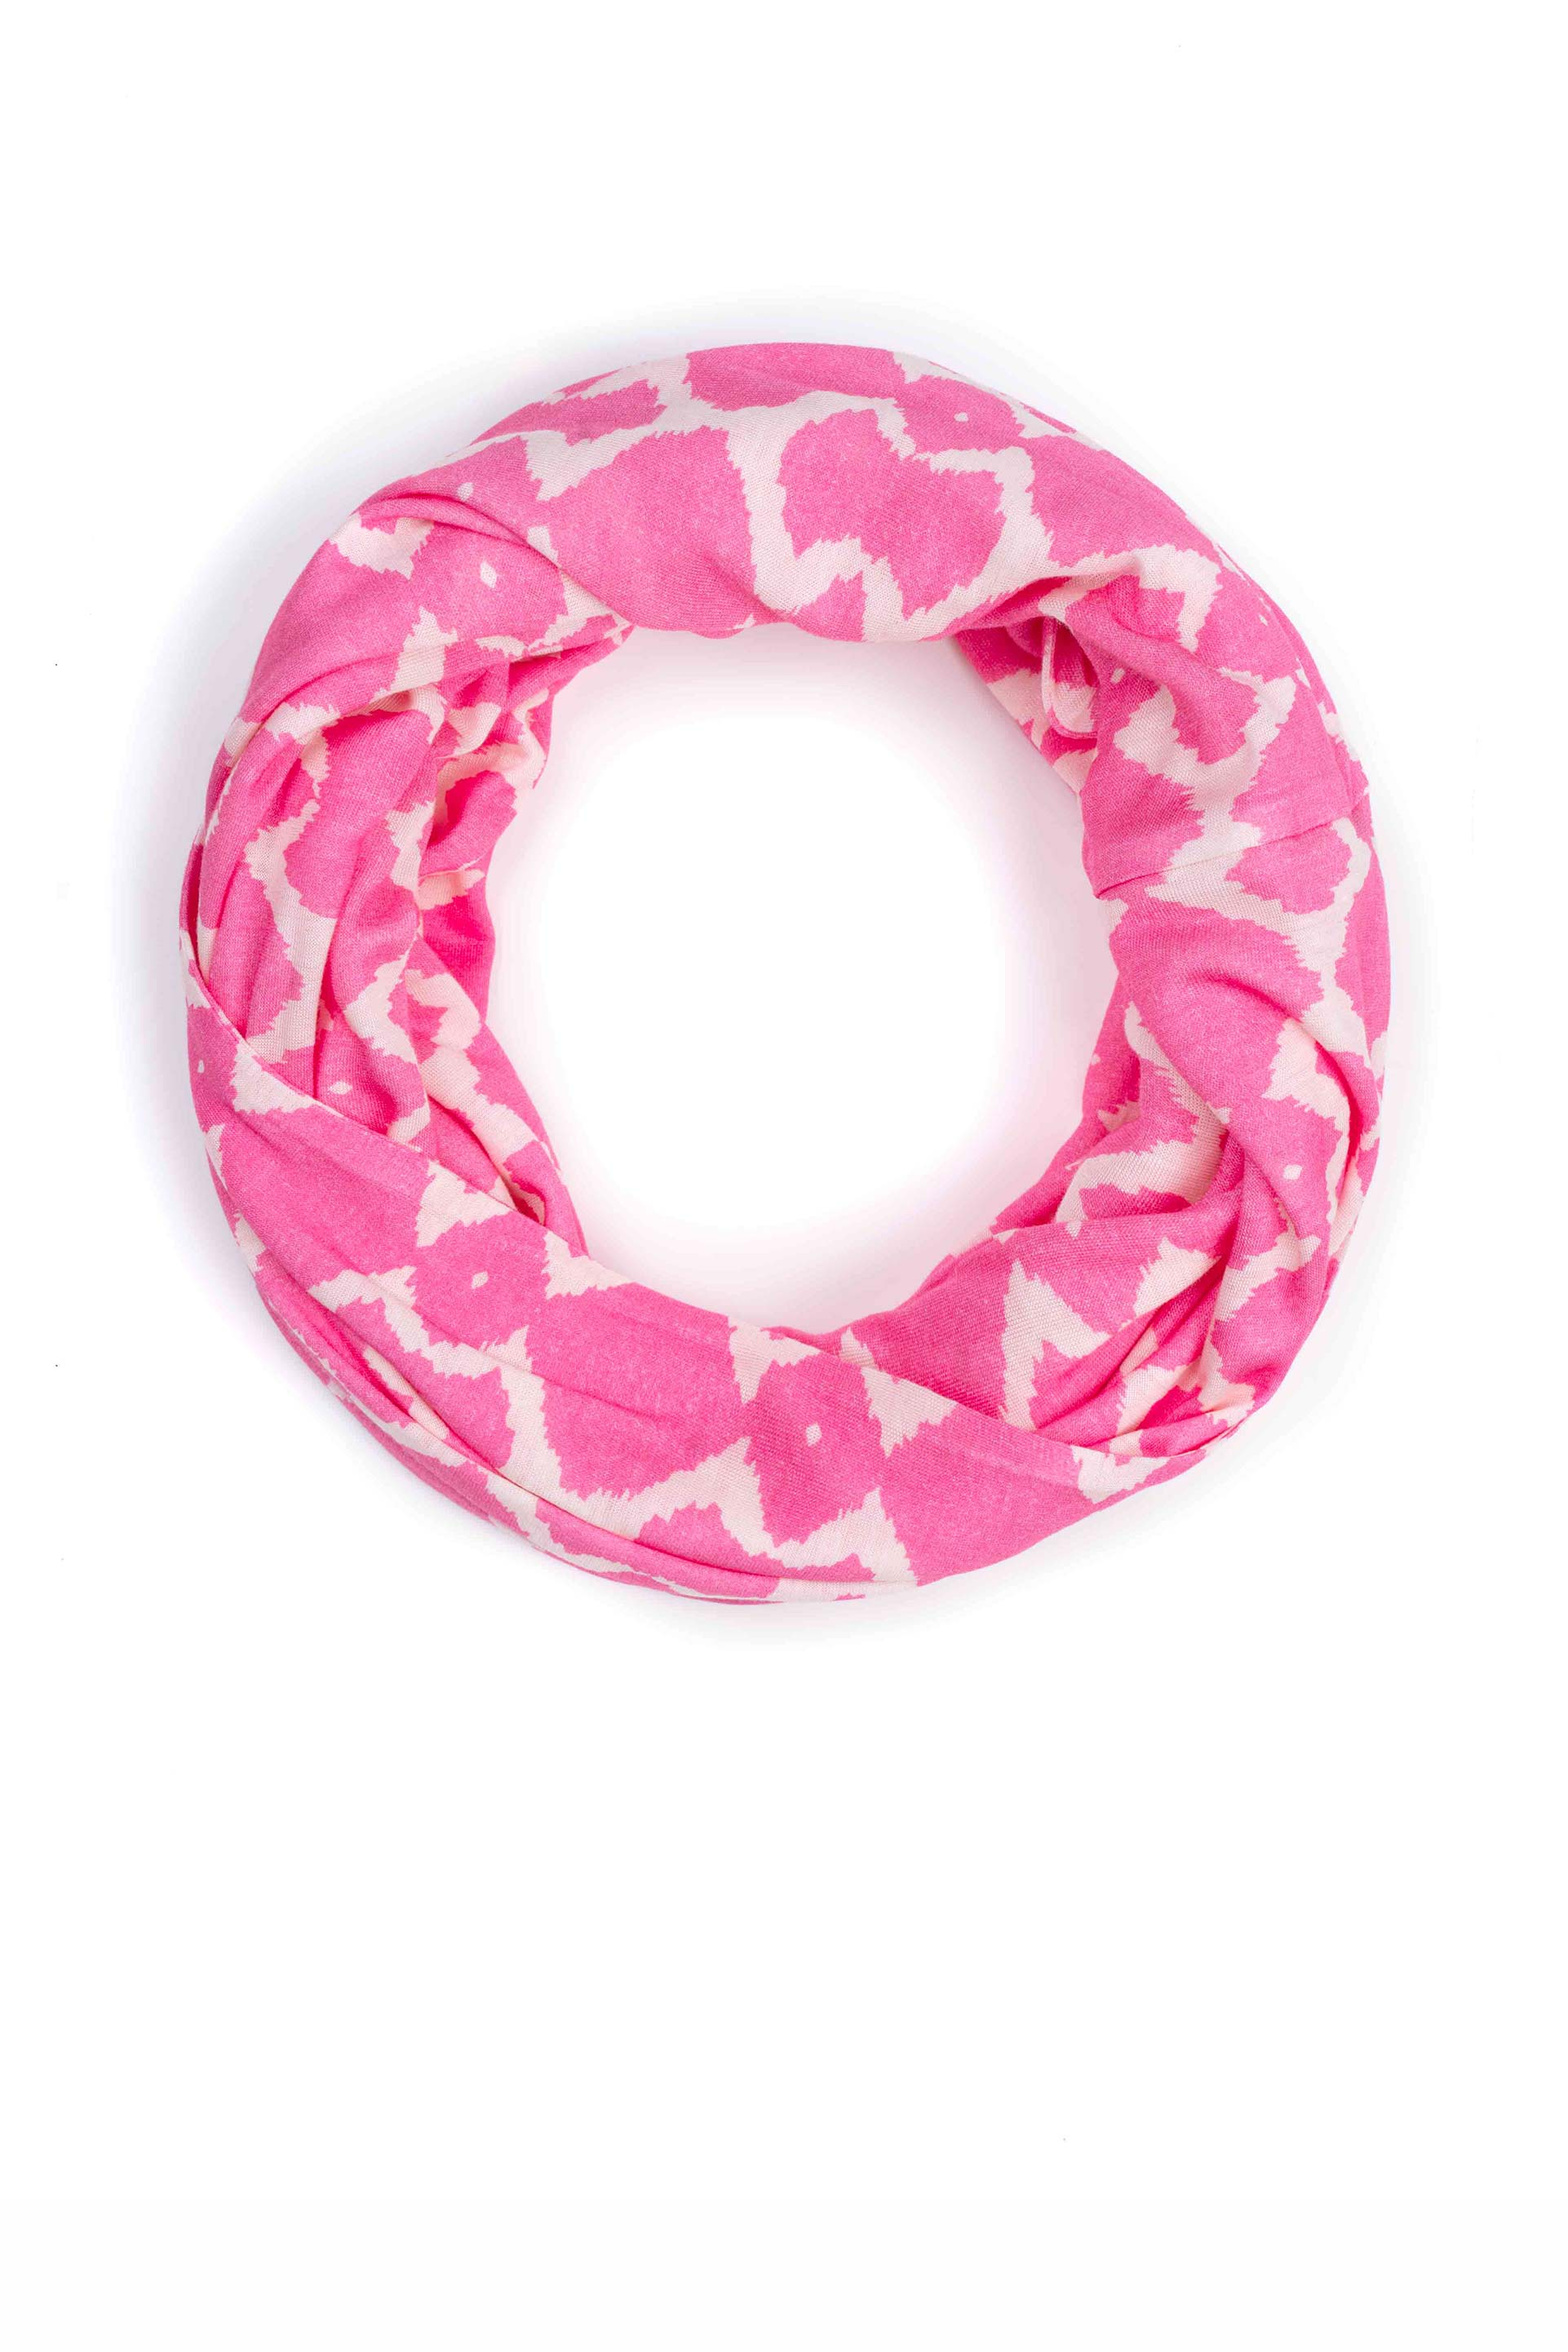 63308_print_infinity_scarf_shocking_pink_and_shell_grey.jpg